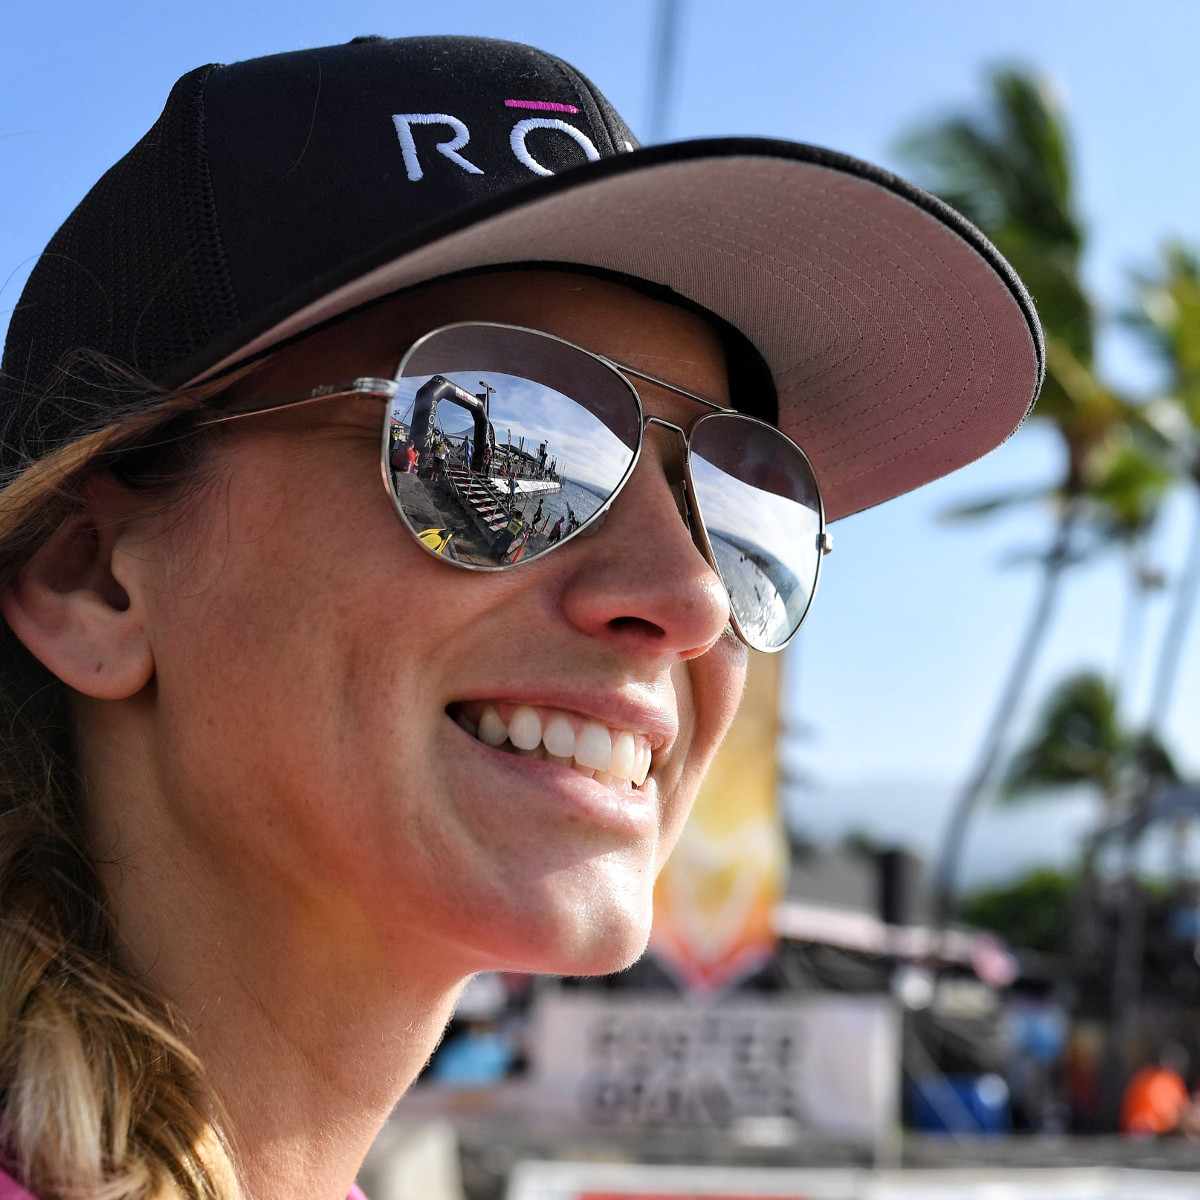 JUST KEEP SMILING. One of thousands of spectators “reflects” as she enjoys the incredible accomplishment of athletes exiting the 2.4-mile swim at the IRONMAN World Championship in Kailua-Kona, Hawai`i (Nils Nilsen/Roka Sports) – Copyright © 2016 IRONMAN, All rights reserved.